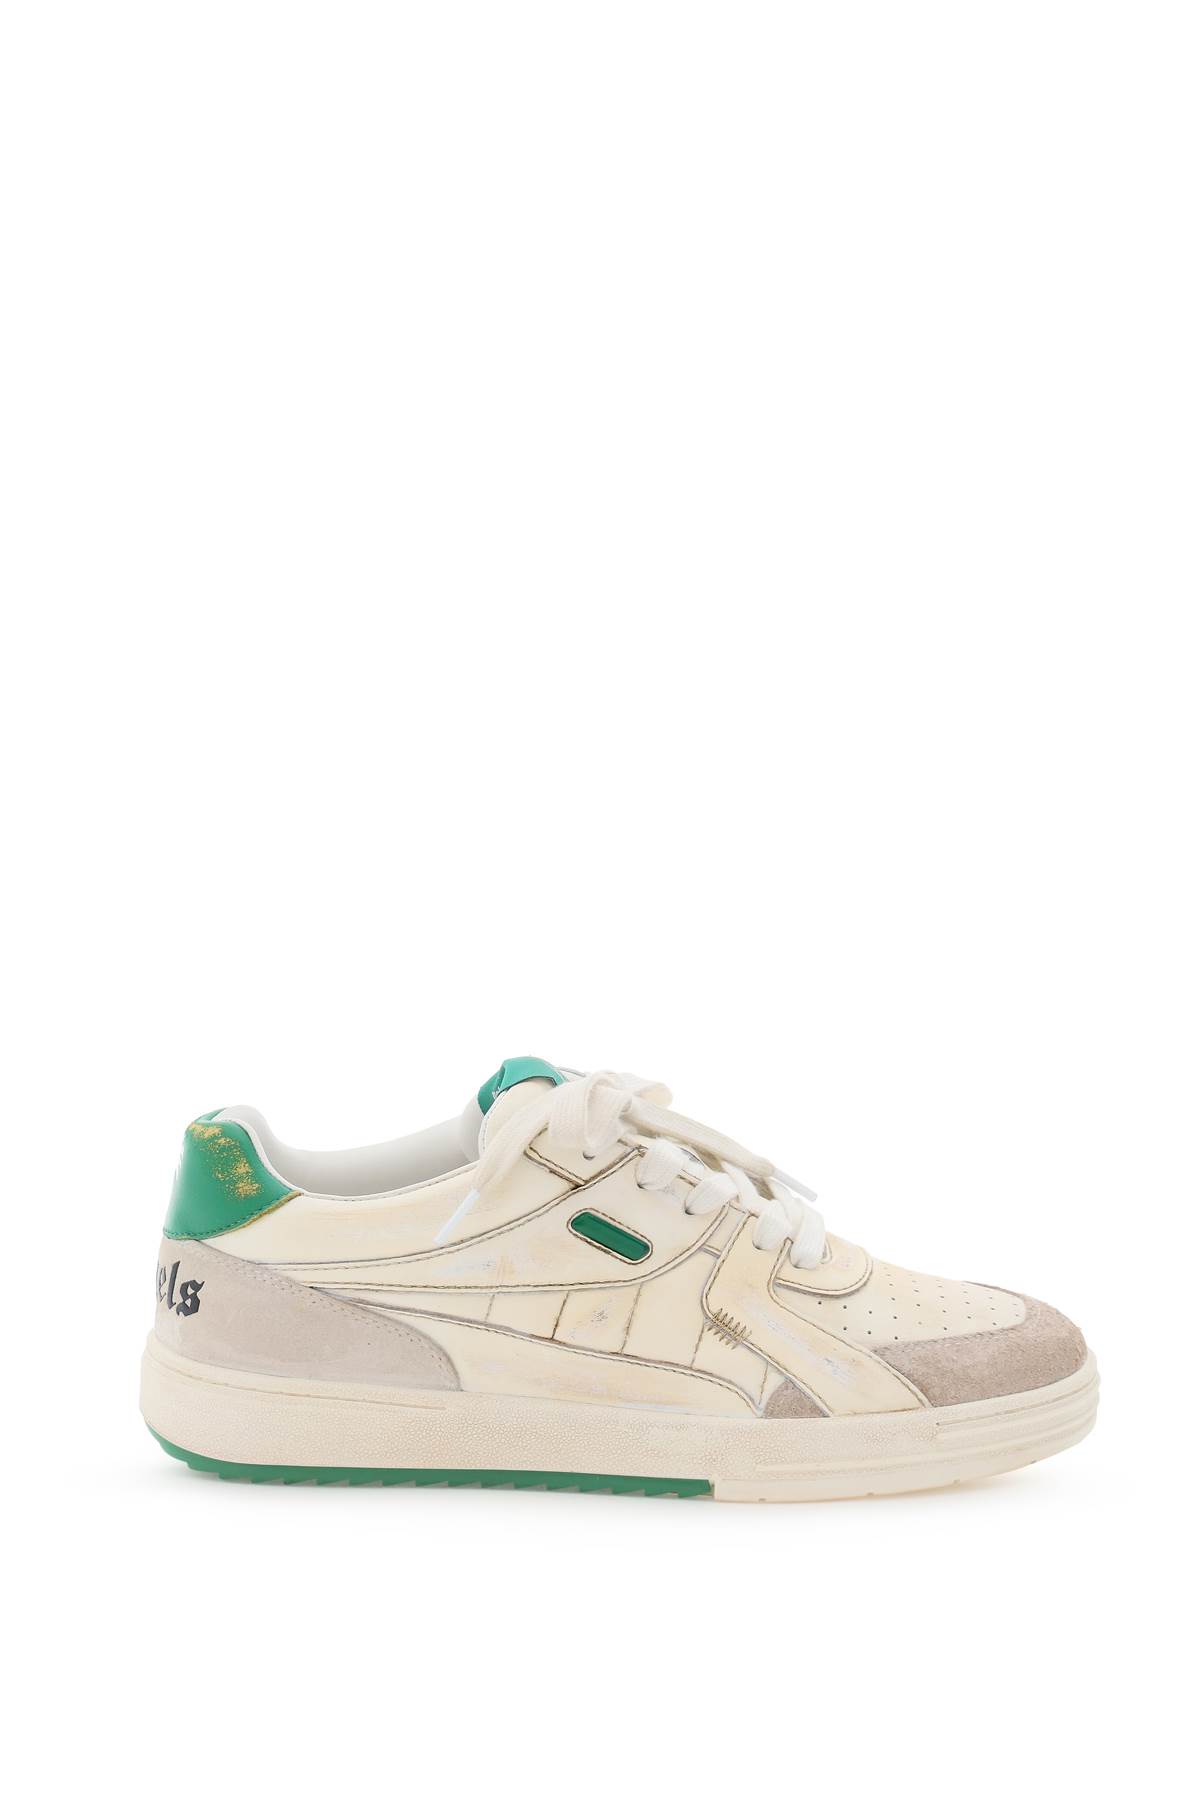 PALM ANGELS UNIVERSITY LEATHER trainers